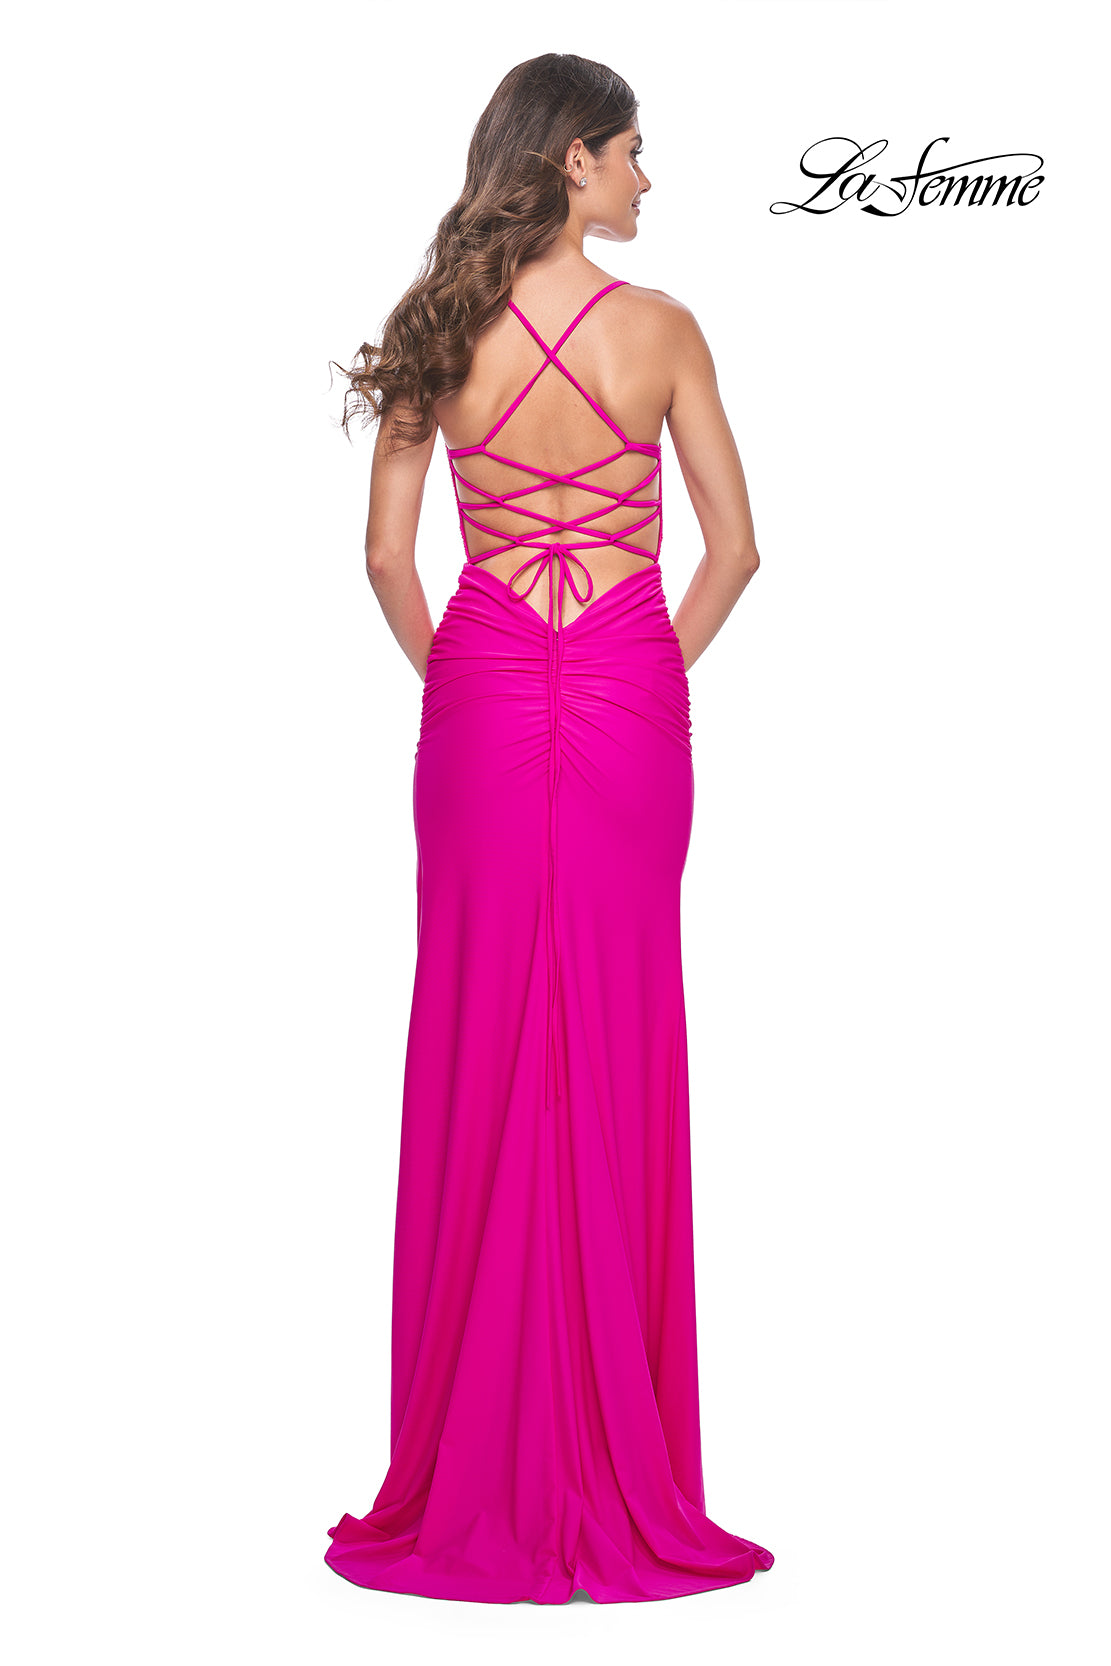 La Femme 31988 Rhinestone Embellished Lace Bodice Prom Gown - A glamorous long dress featuring a ruched jersey skirt, high slit, rhinestone embellished lace bodice with exposed boning, lace-up back, and ruching along the zipper for a perfect fit.  The model is wearing the dress in hot fuchsia.